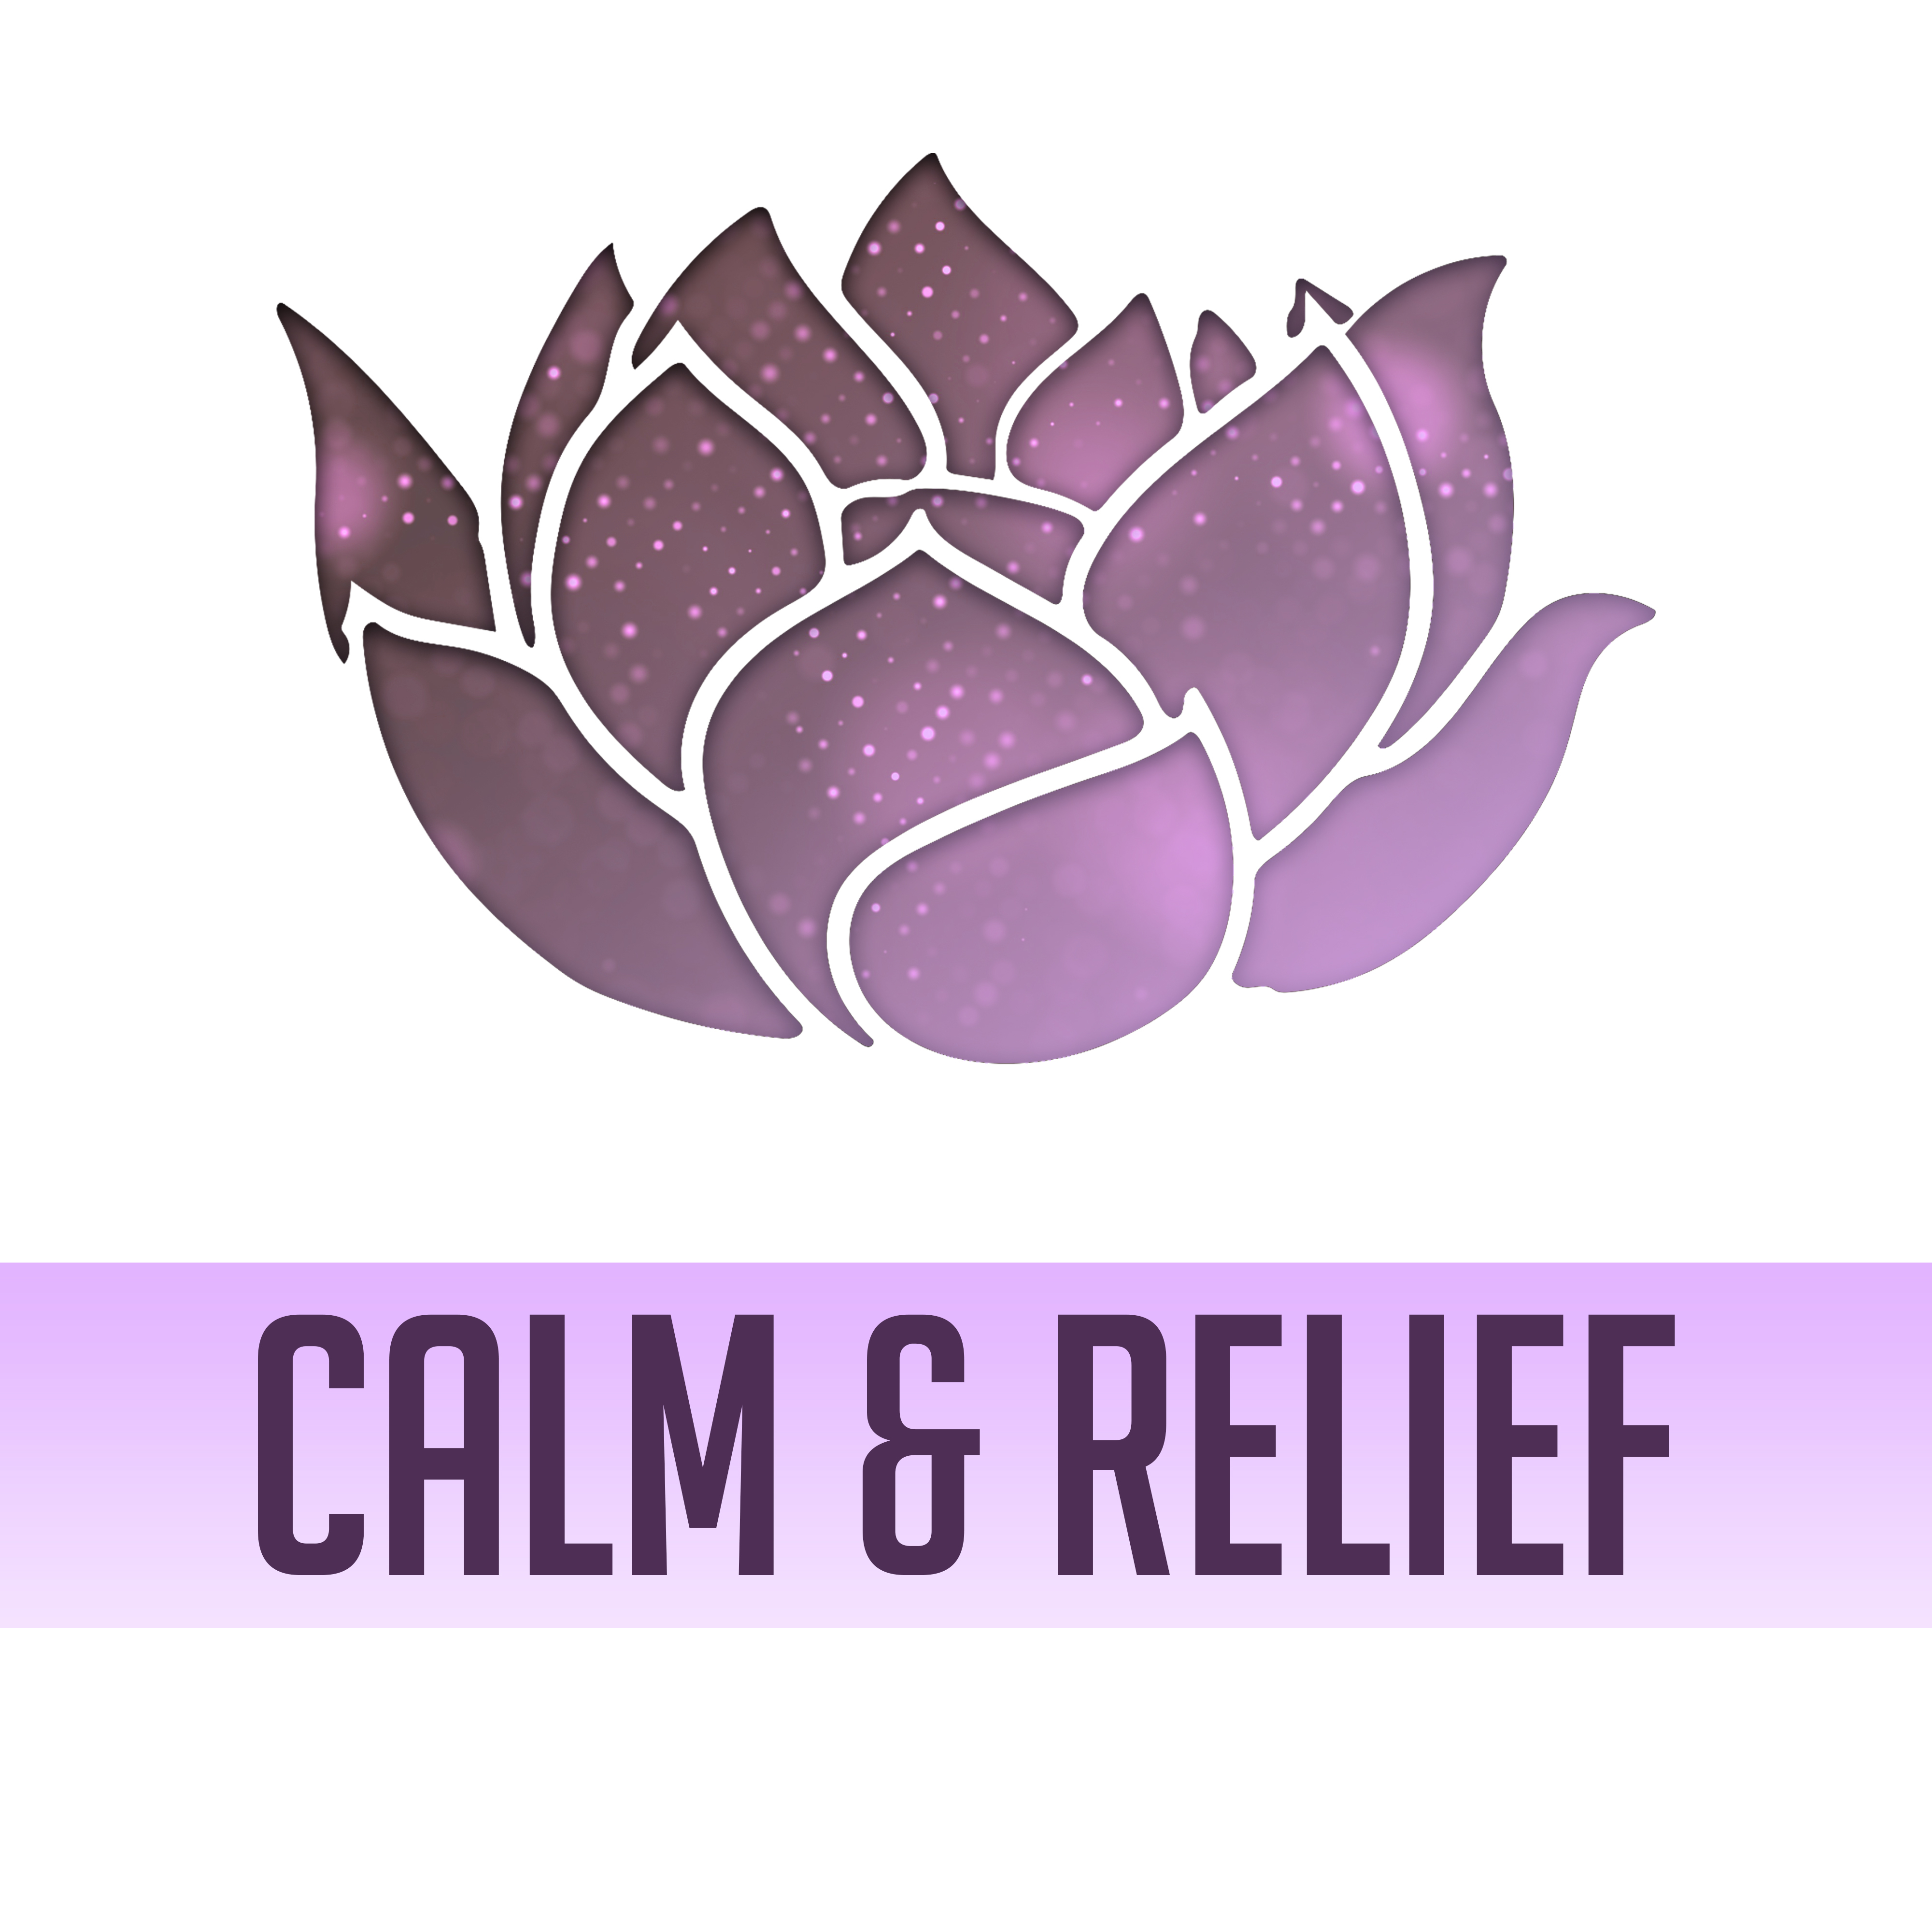 Calm  Relief  Spa Music, Singing Birds, Soothing Rain, Gentle Nature Sounds for Rest, Wellness, Relaxation, Pure Mind, Deep Massage